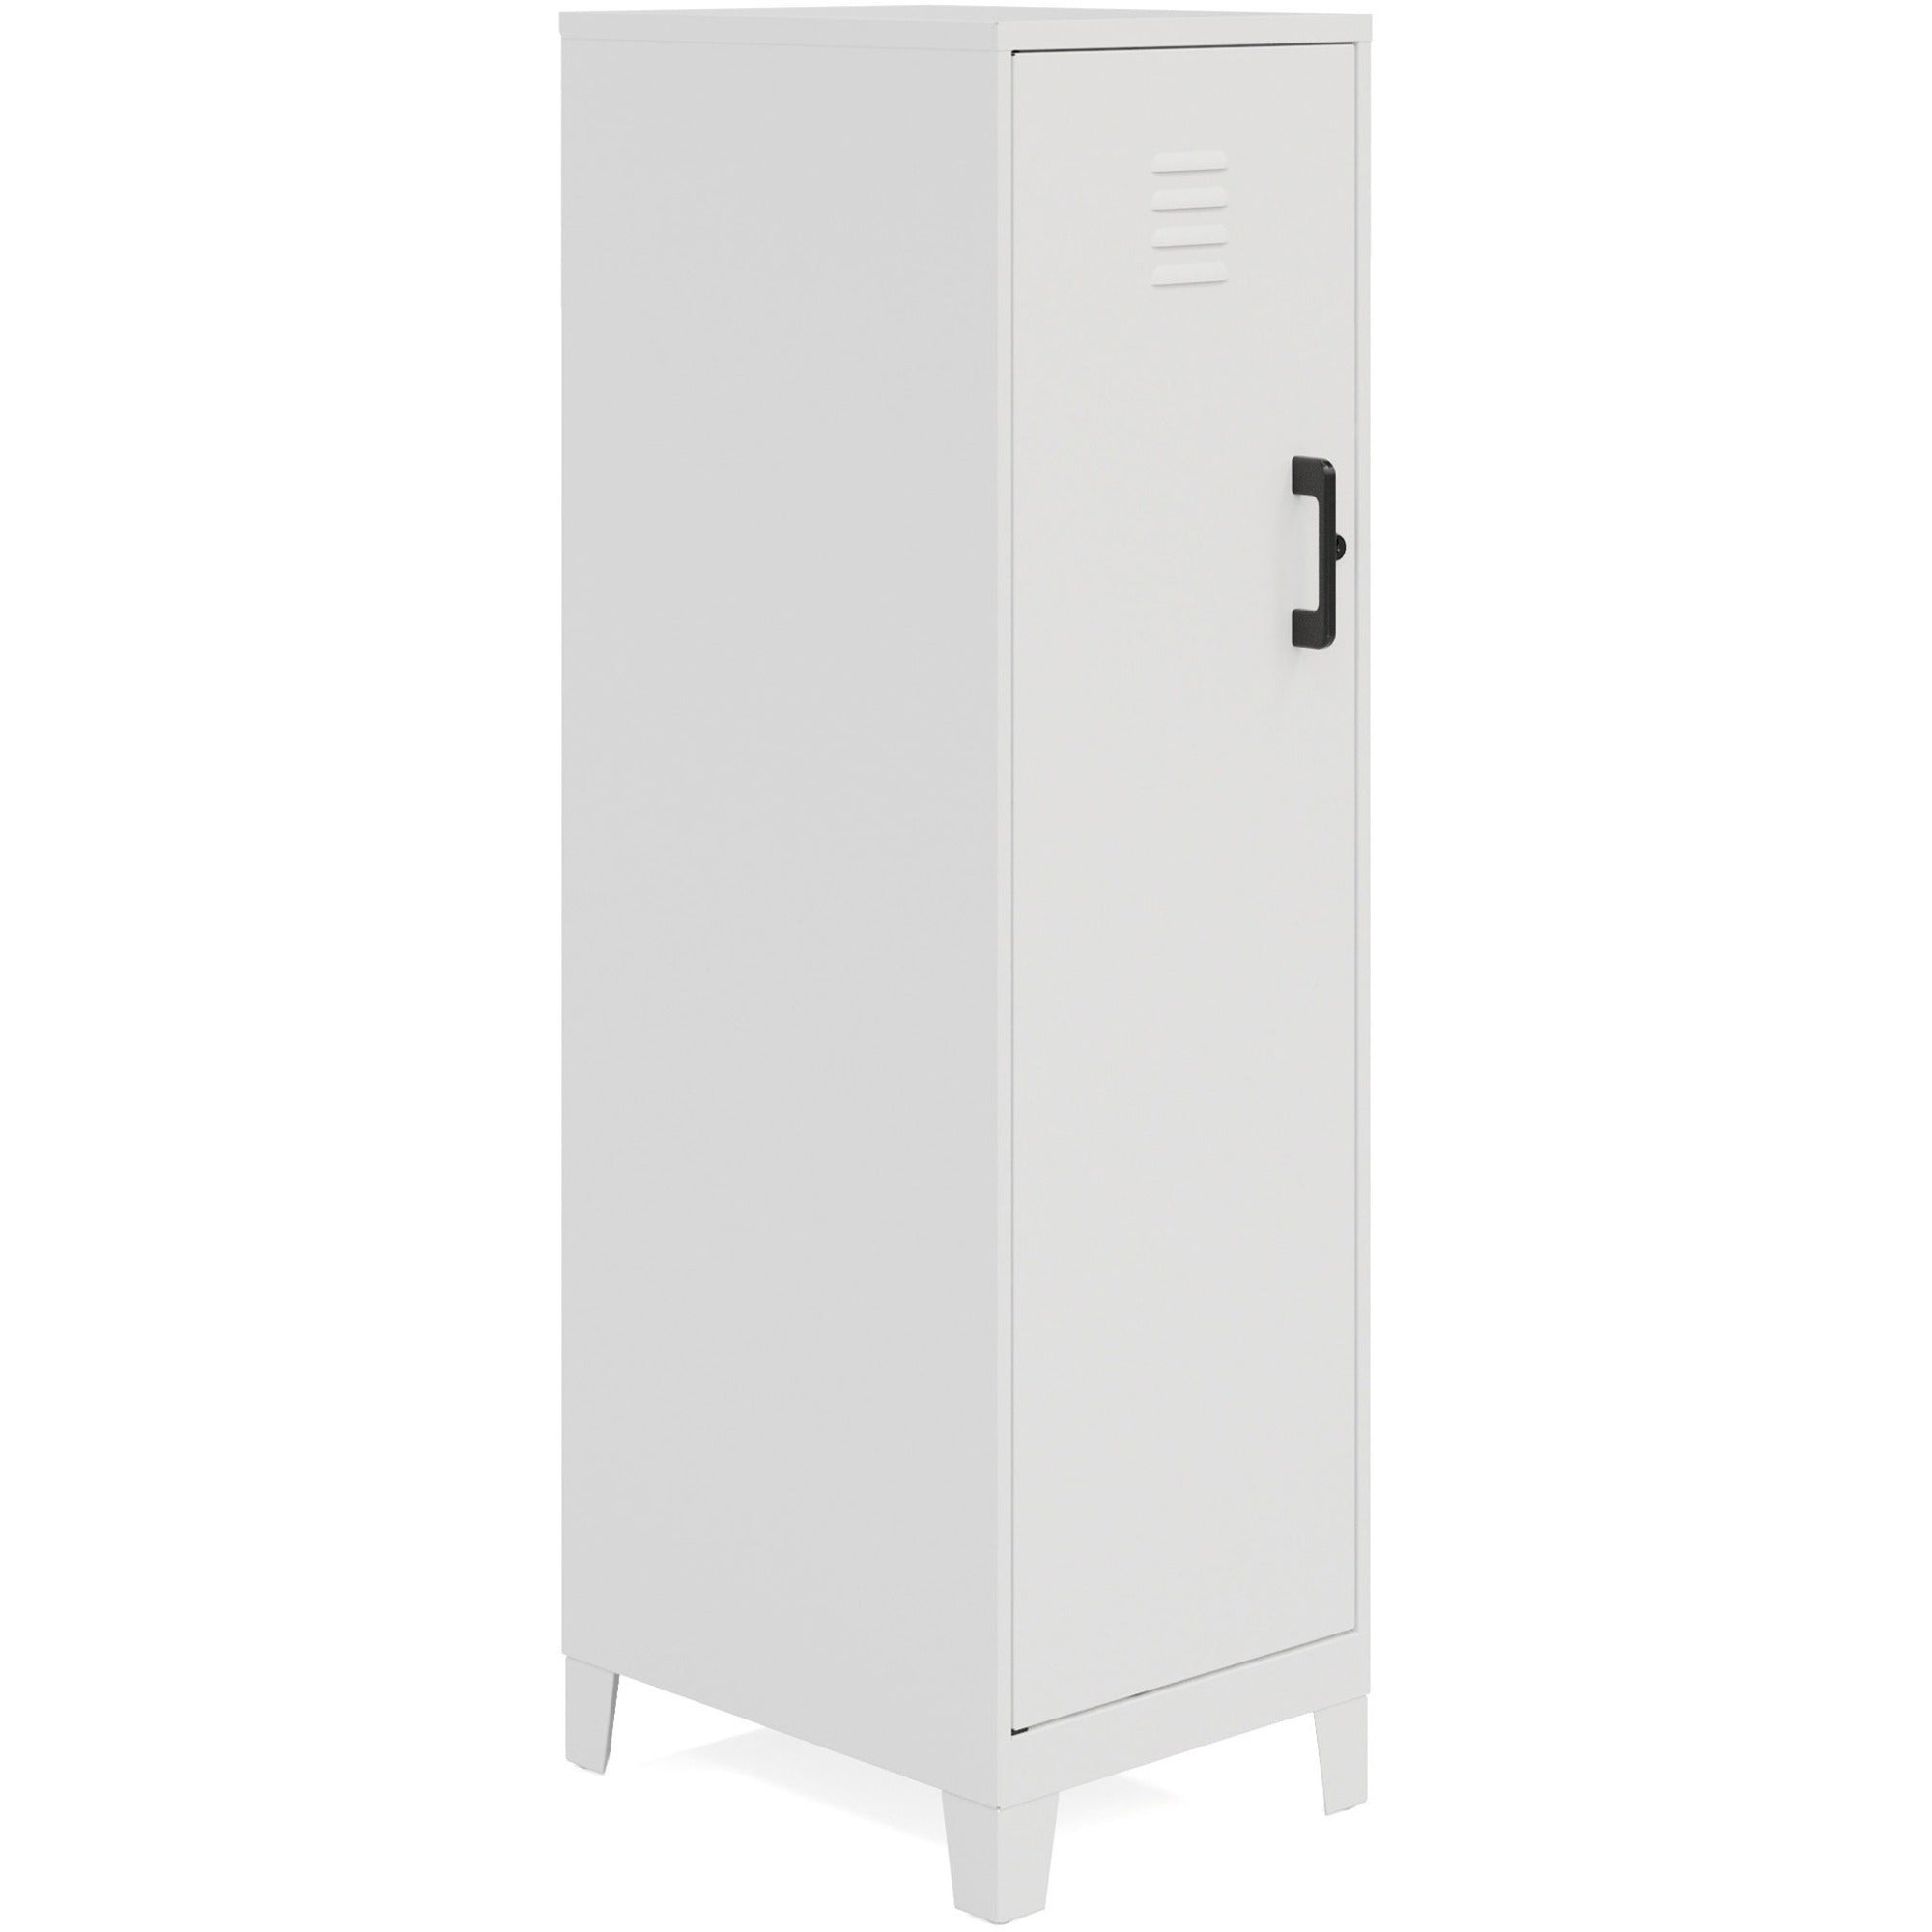 nusparc-personal-locker-4-shelves-for-office-home-sport-equipments-toy-game-classroom-playroom-basement-garage-overall-size-533-x-142-x-18-white-steel-taa-compliant_nprsl418zzwe - 1